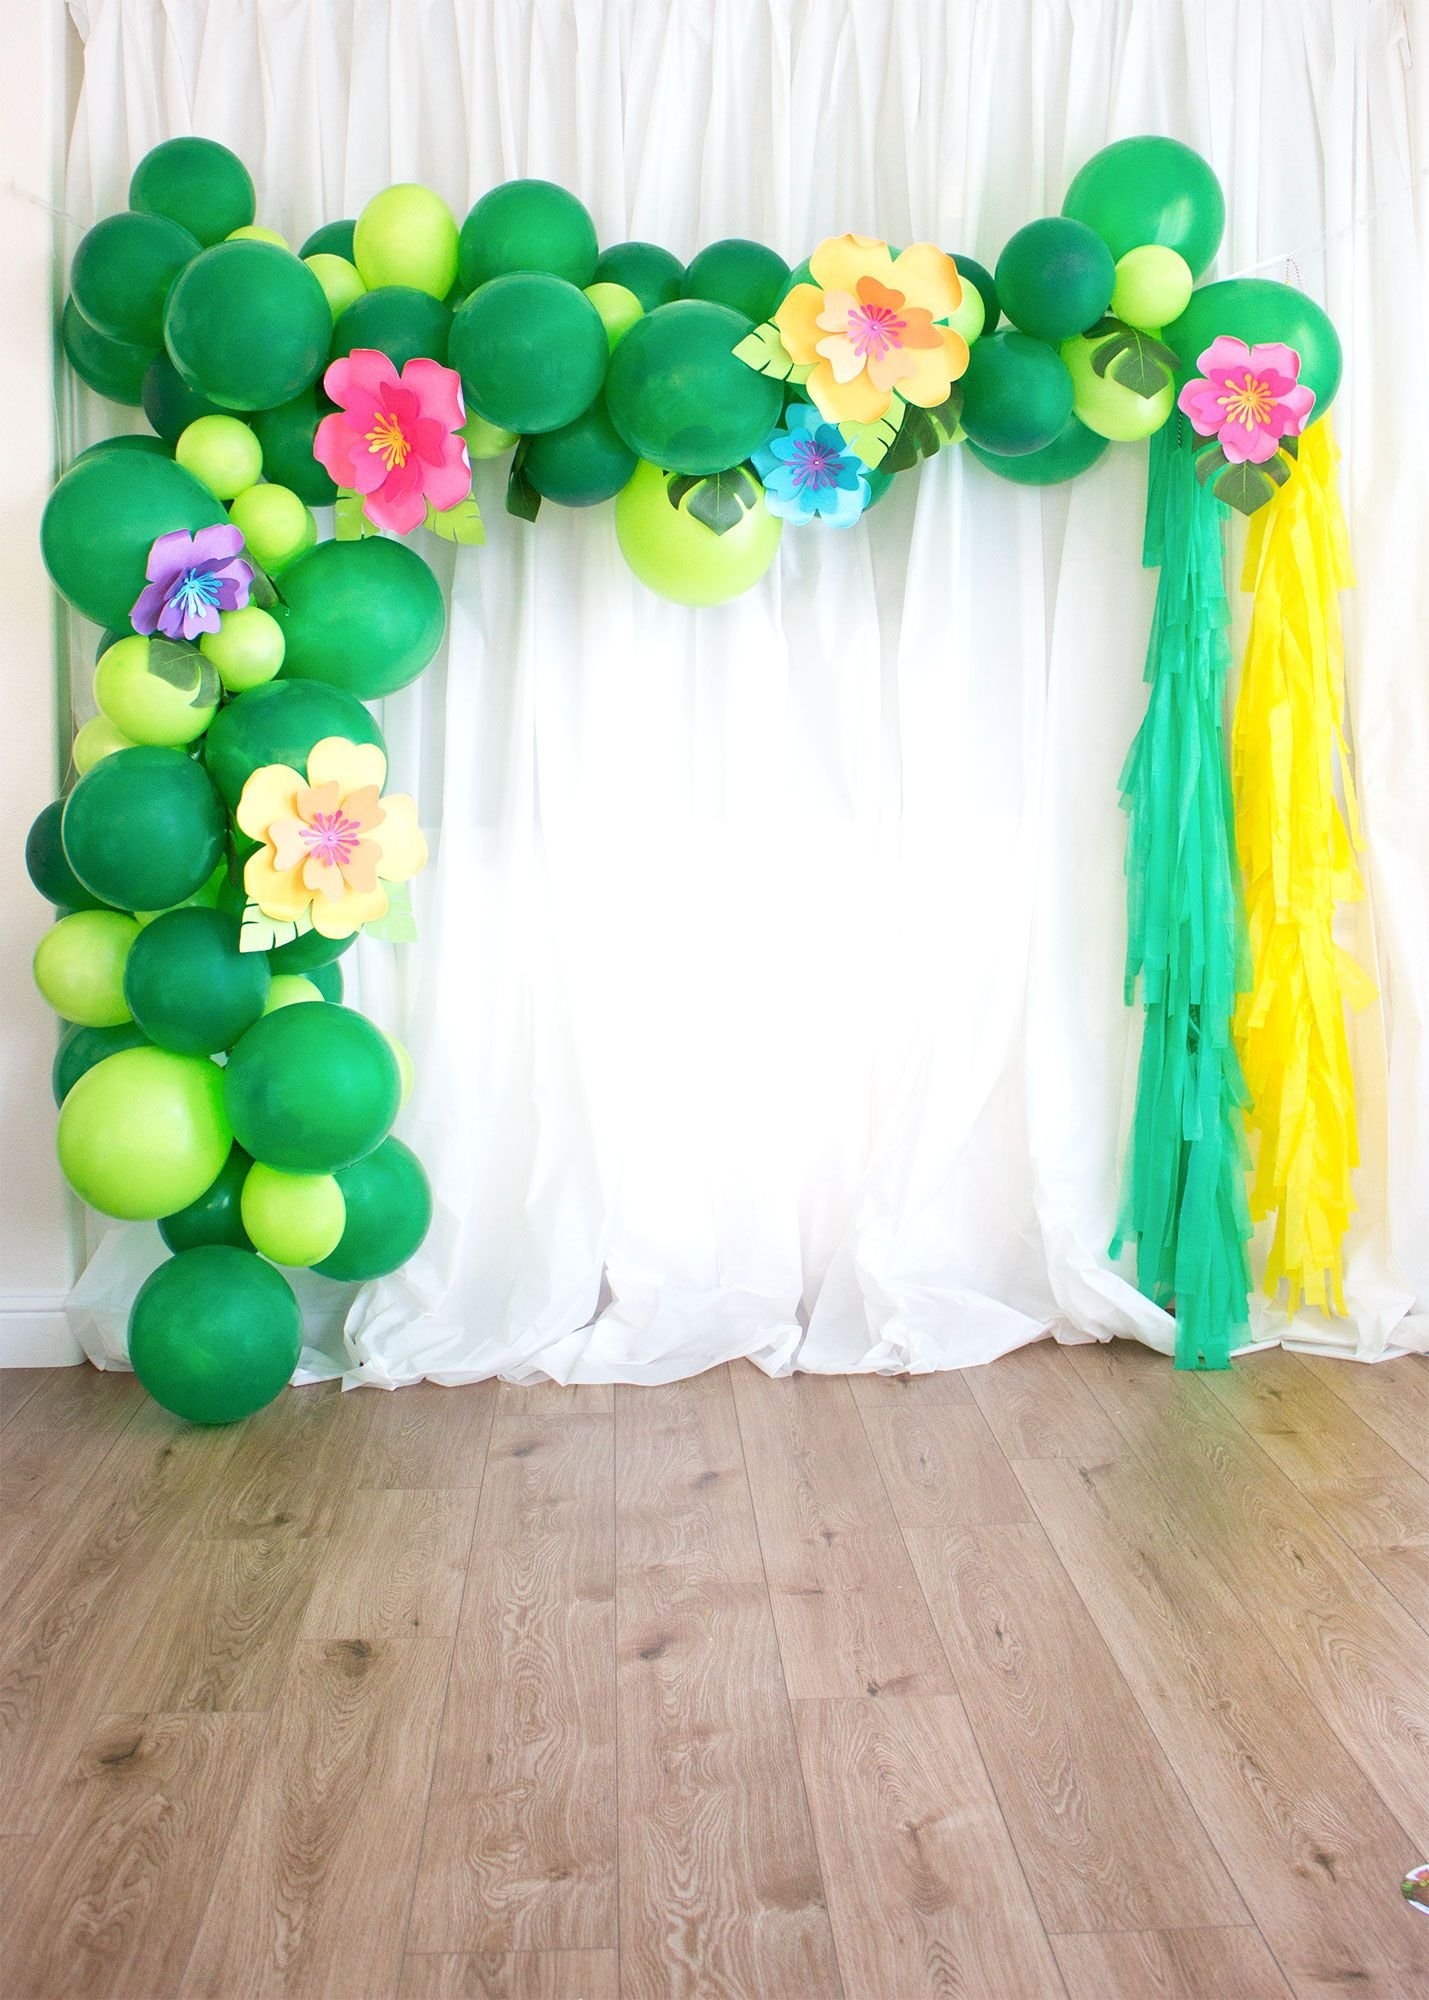 Tropical-Themed Balloon Garland with Latex Balloons